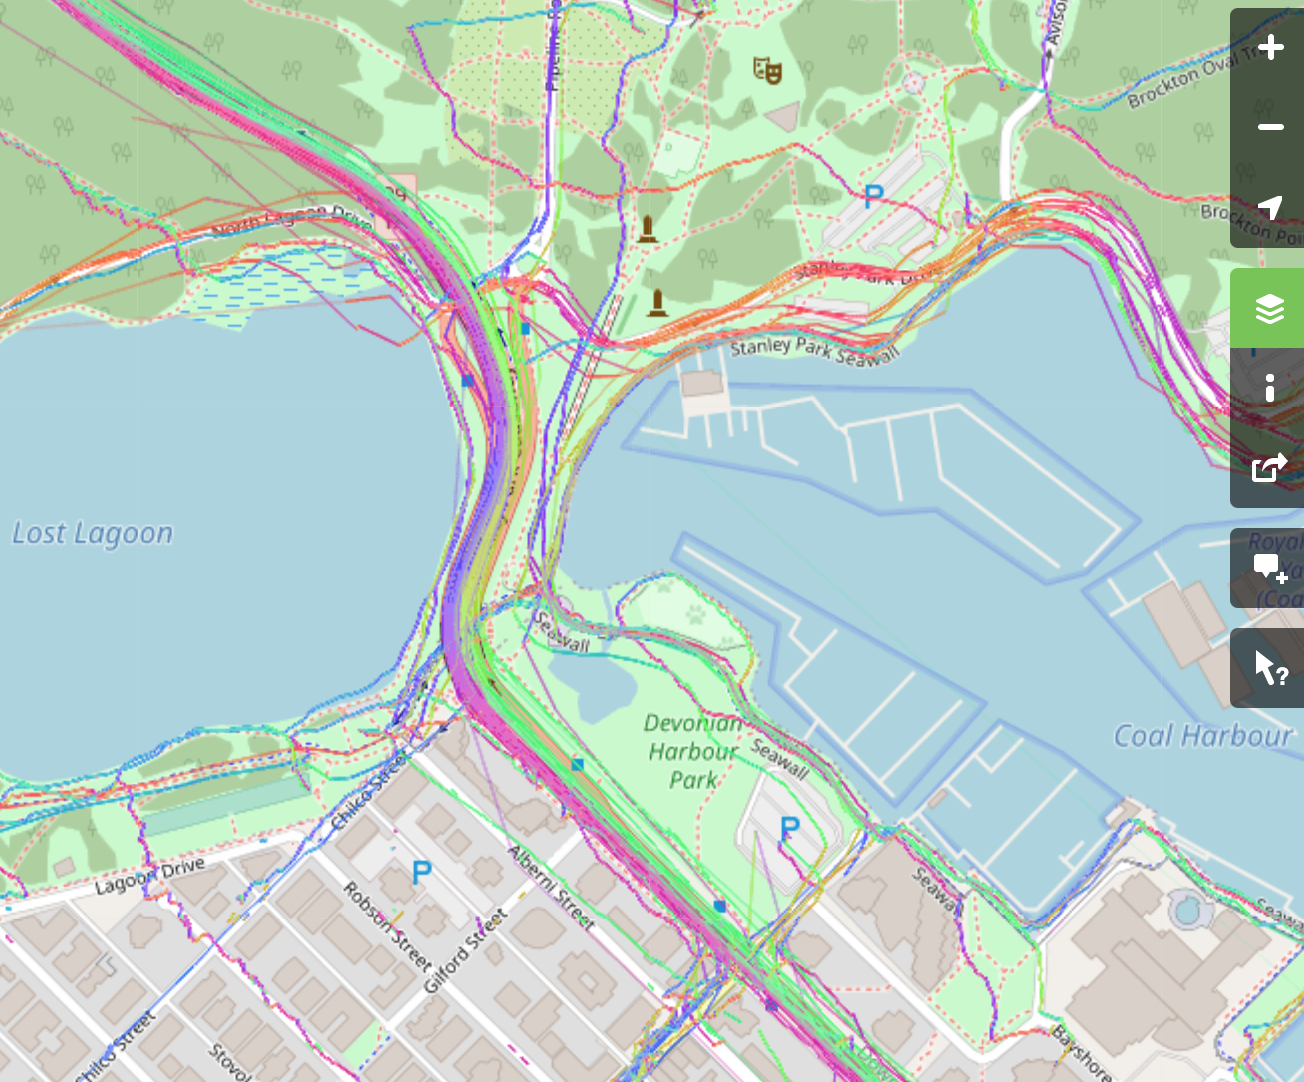 Screenshot of [OSM public GPS trace data near Stanley Park](https://www.openstreetmap.org/search?query=stanley%20park#map=14/49.3019/-123.1380&layers=G), Vancouver, BC.  OpenStreetMap, licensed under Creative Commons (CC BY-SA 2.0).